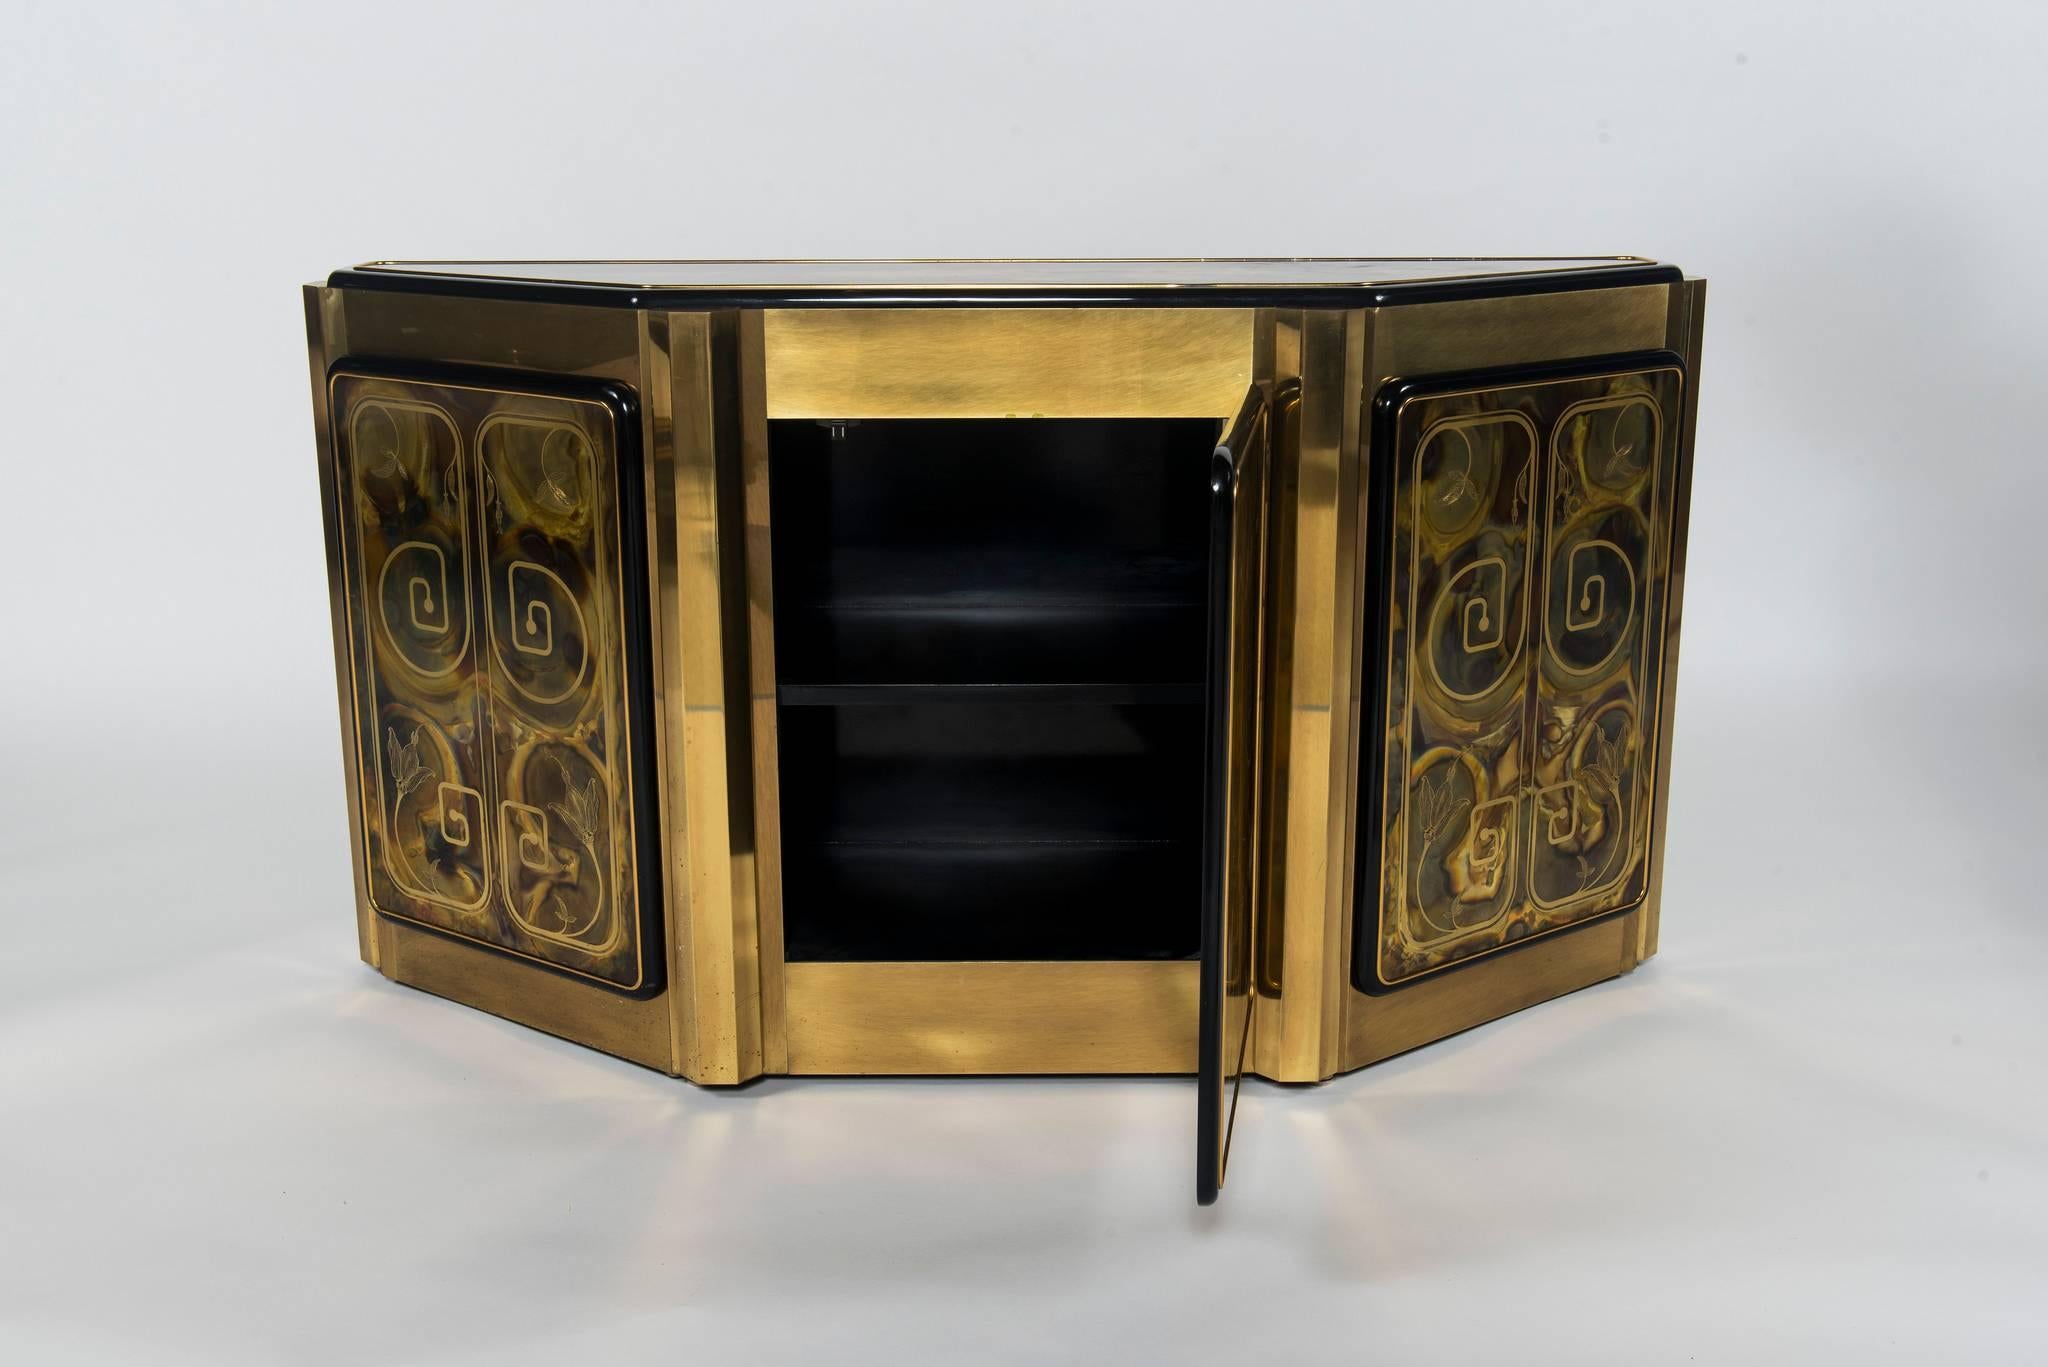 This Mastercraft cabinet features an acid-etched floral design on its unique brass finish. Centre door opens to access a fixed shelf.